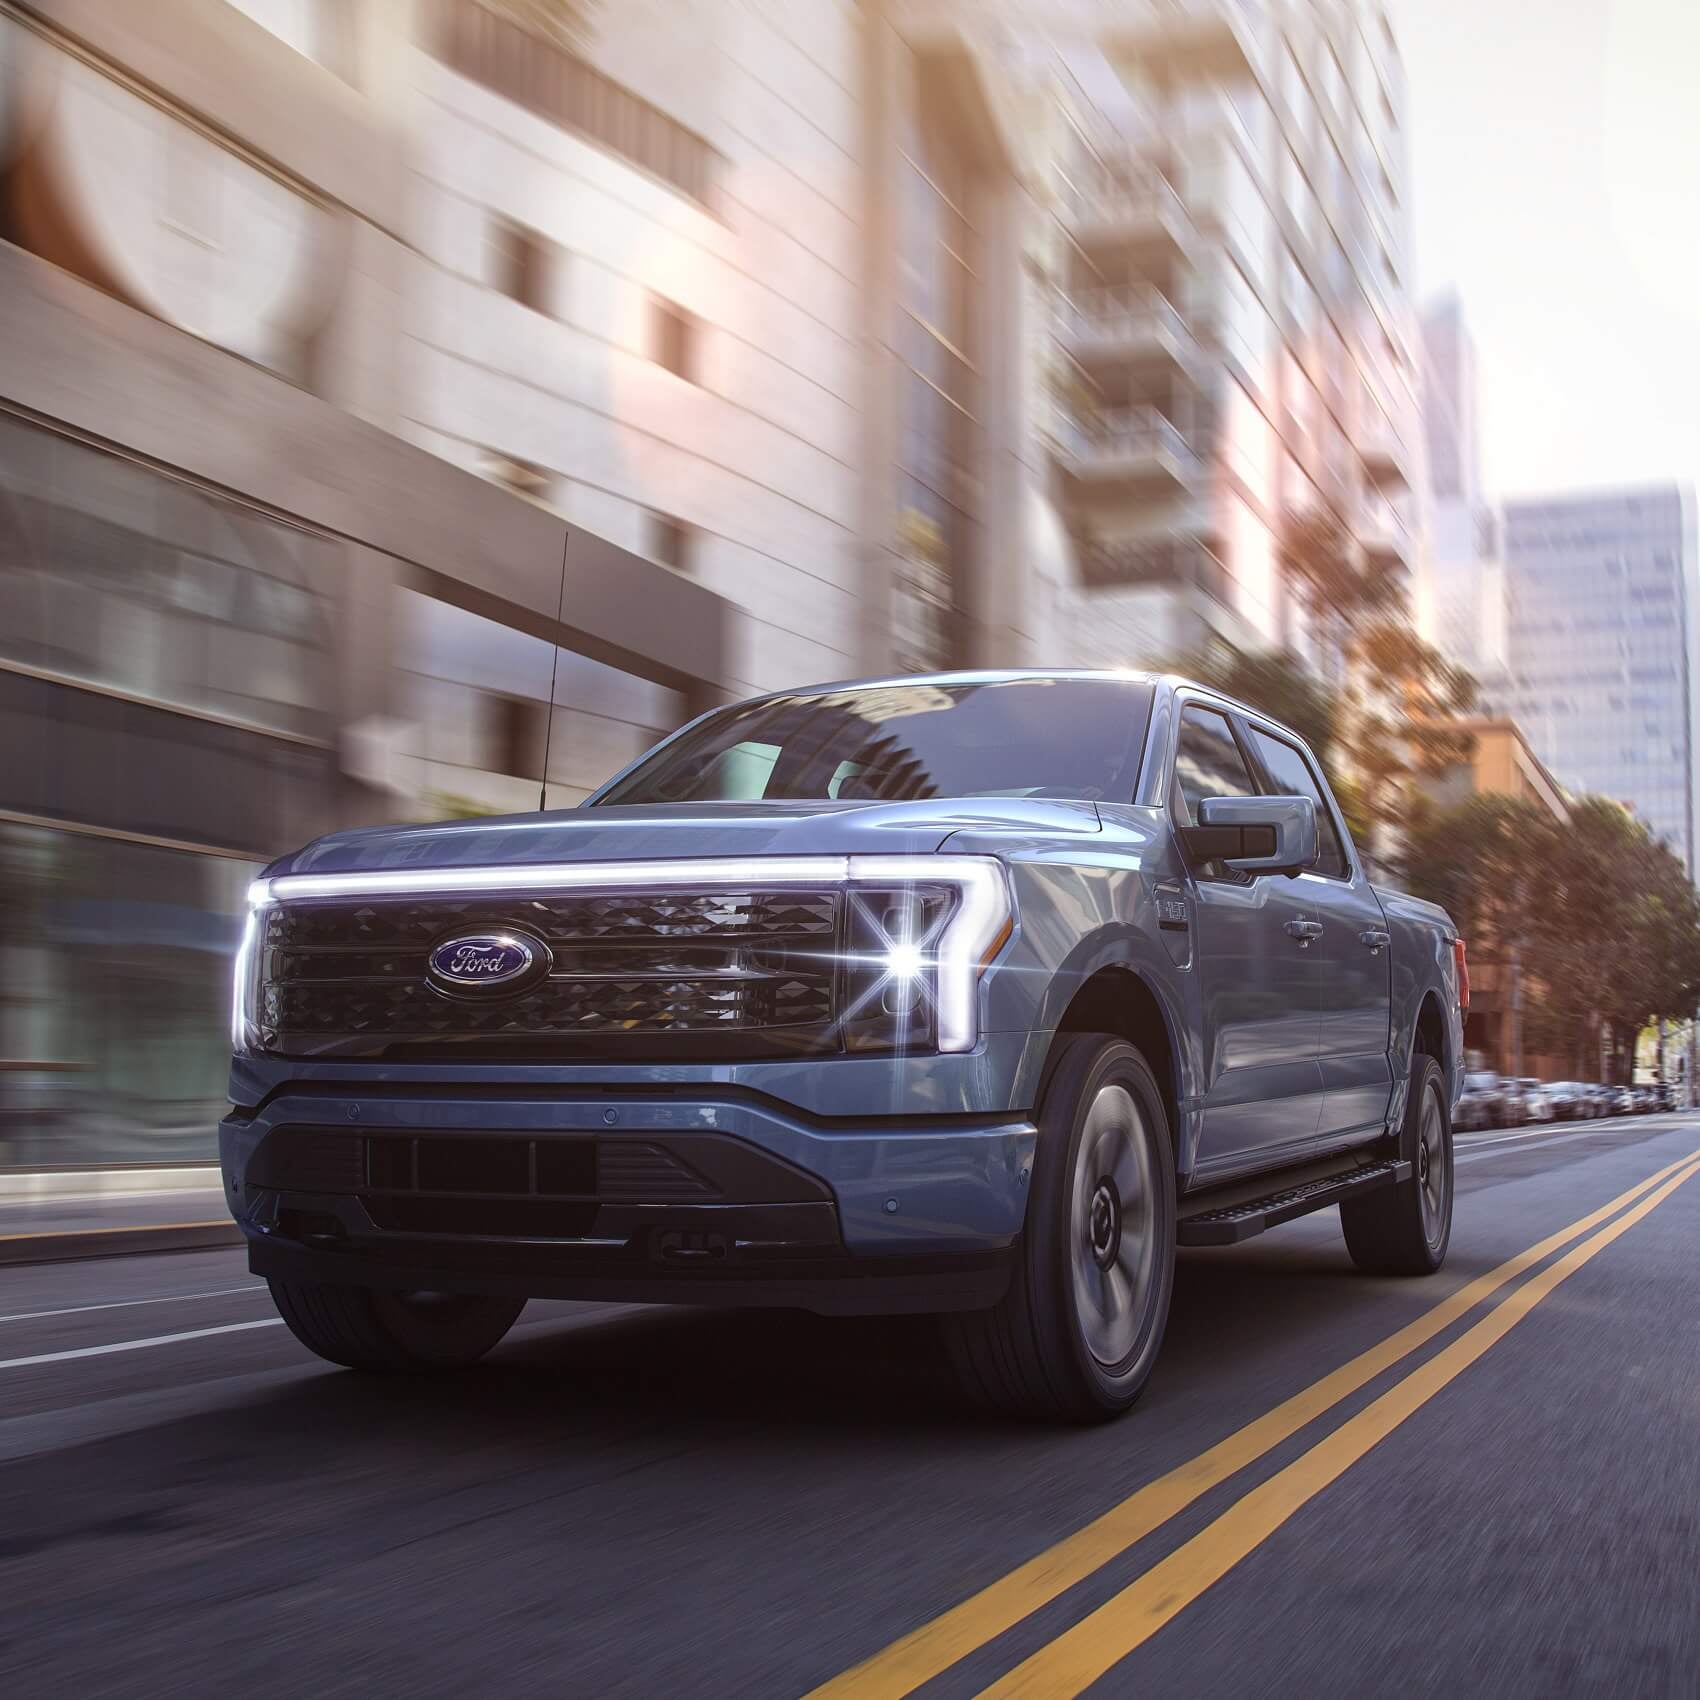 What’s the All-Electric Range of the Ford F-150 Lightning?